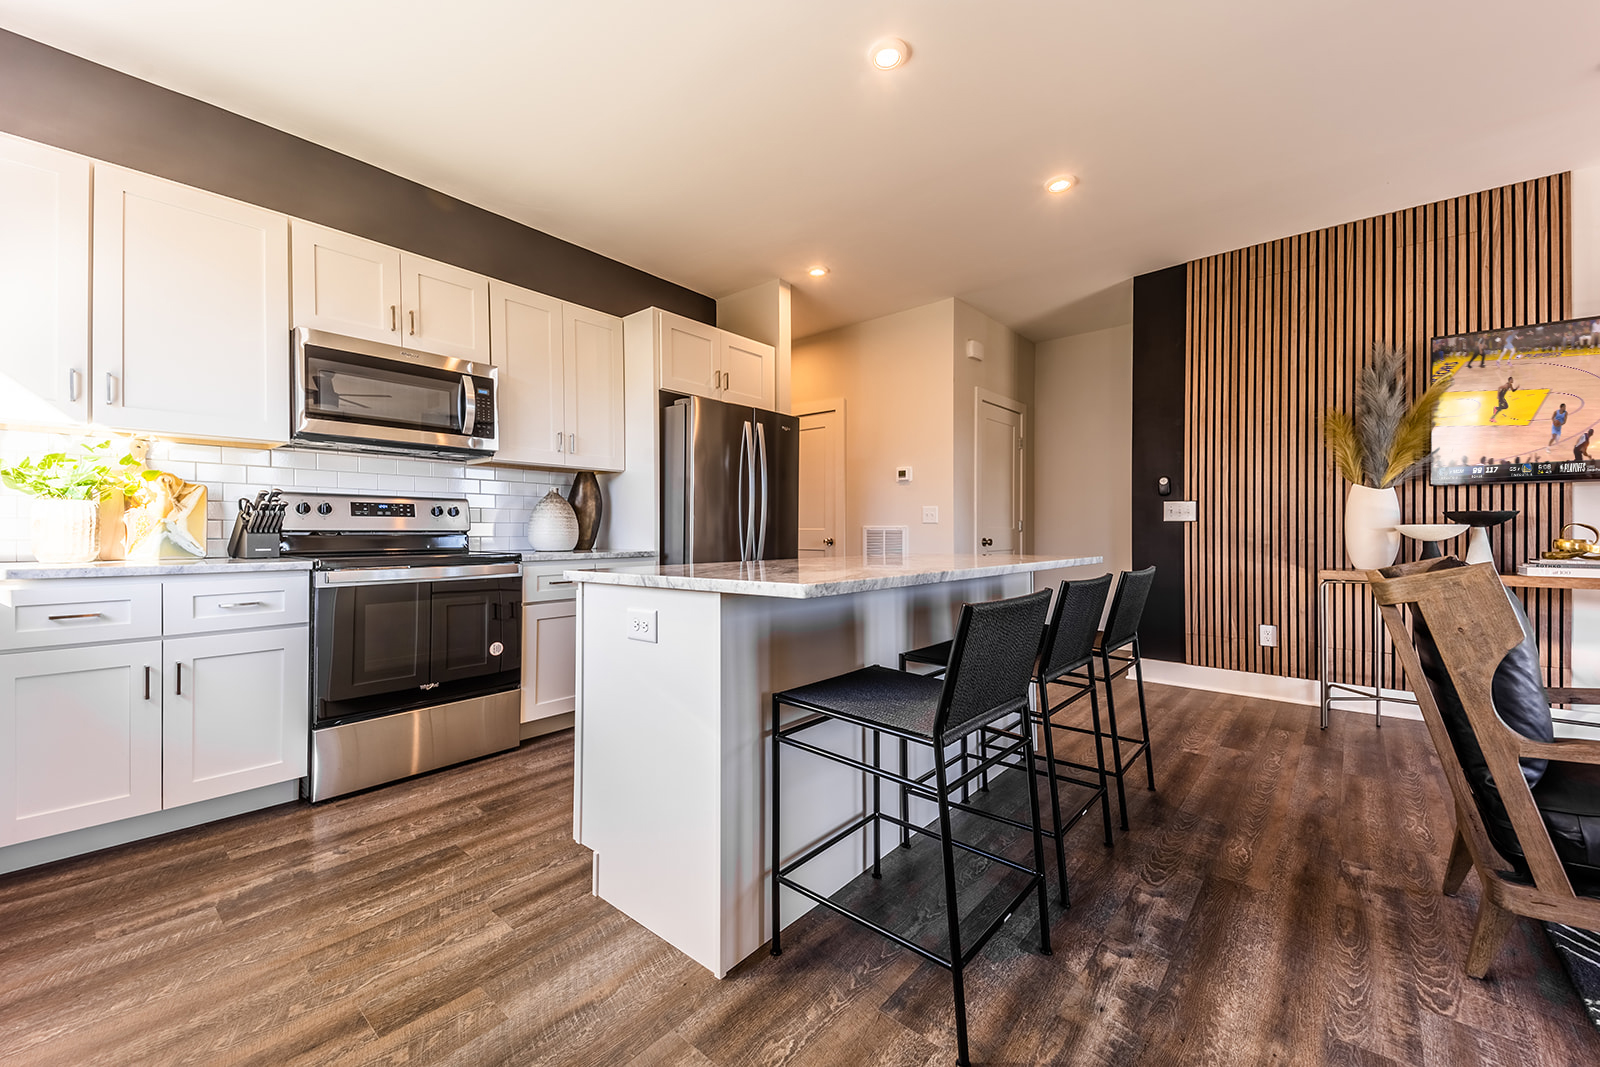 Unit 1: Fully Equipped Kitchen stocked with your basic cooking essentials and stainless-steel appliances. (2nd Floor)